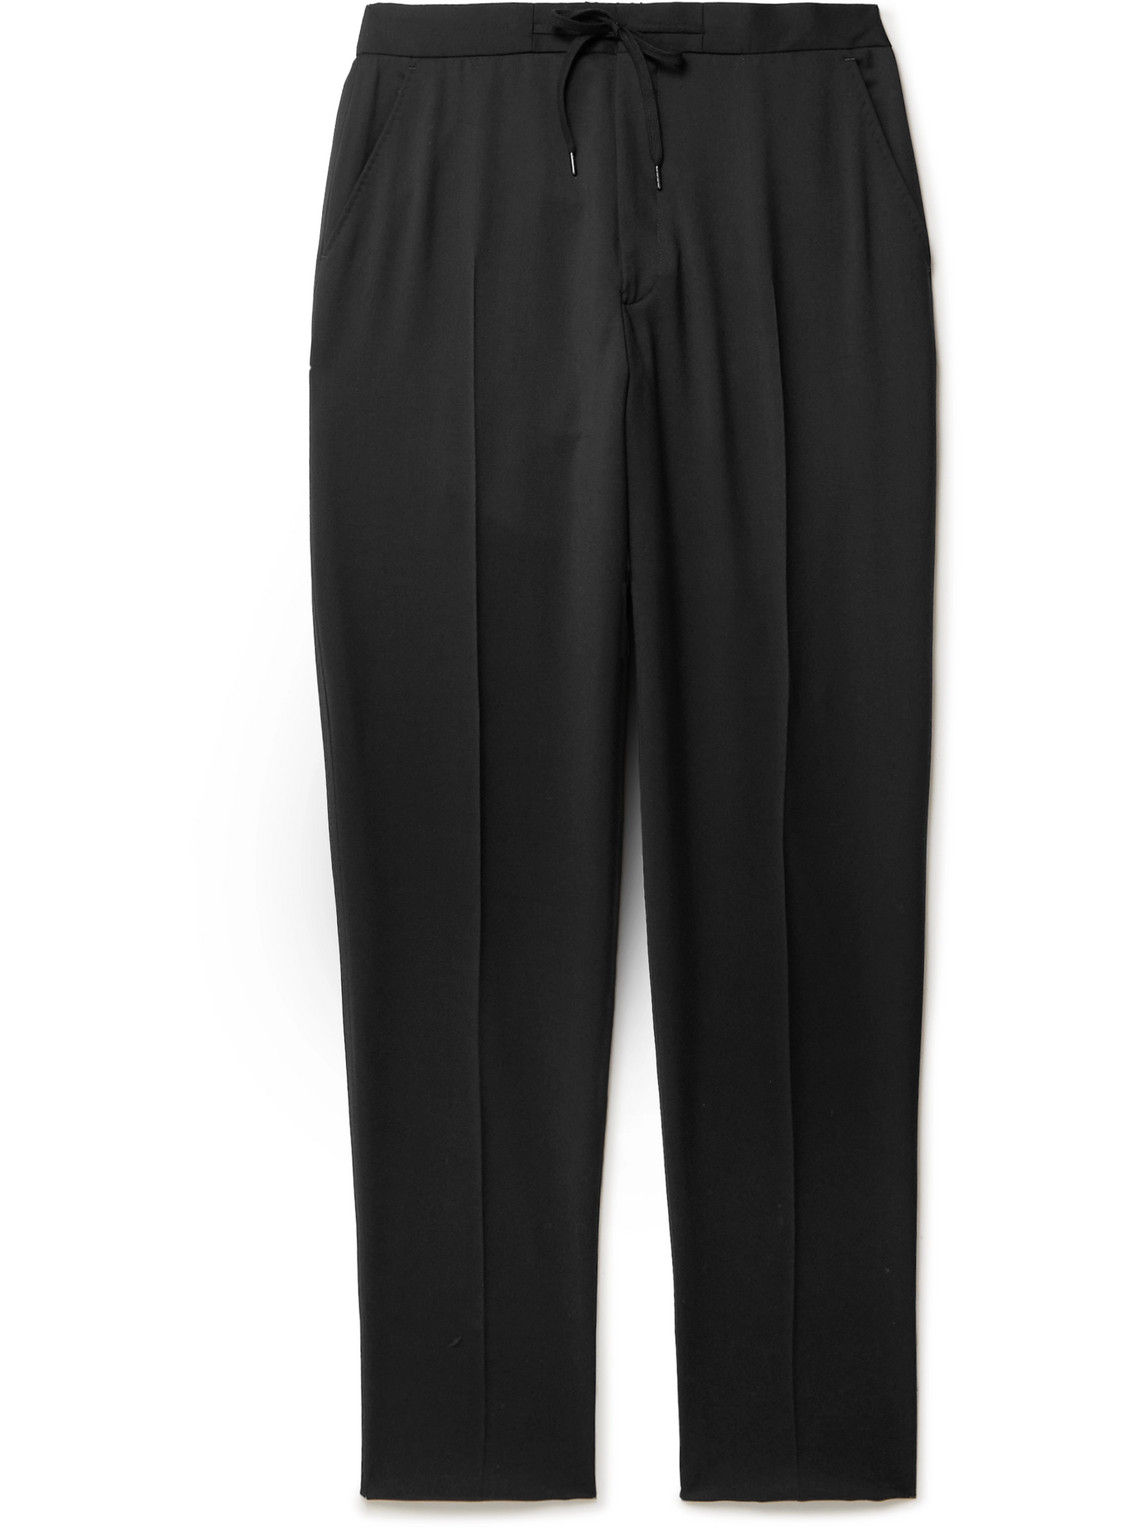 Mr P Tapered Wool Drawstring Trousers In Black